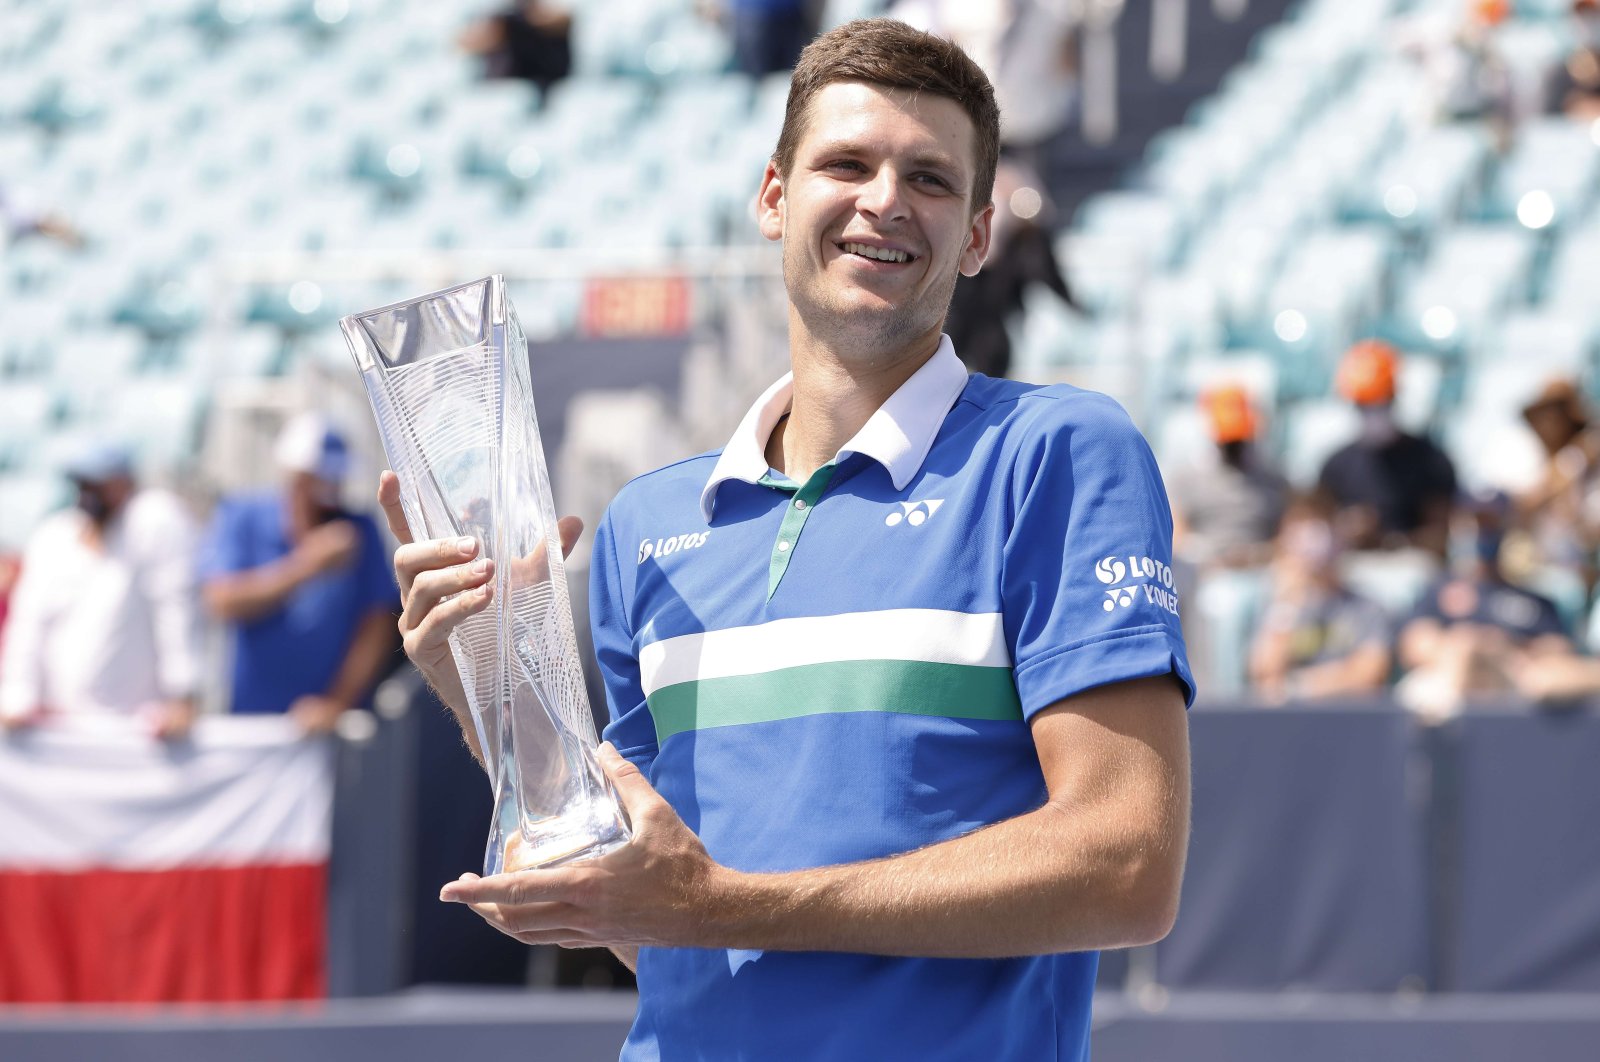 Poland's Hubert Hurkacz poses with the Miami Open trophy after beating Italy's Jannik Sinner in the final at Hard Rock Stadium, Miami Gardens, Florida, April 04, 2021. (AFP Photo)